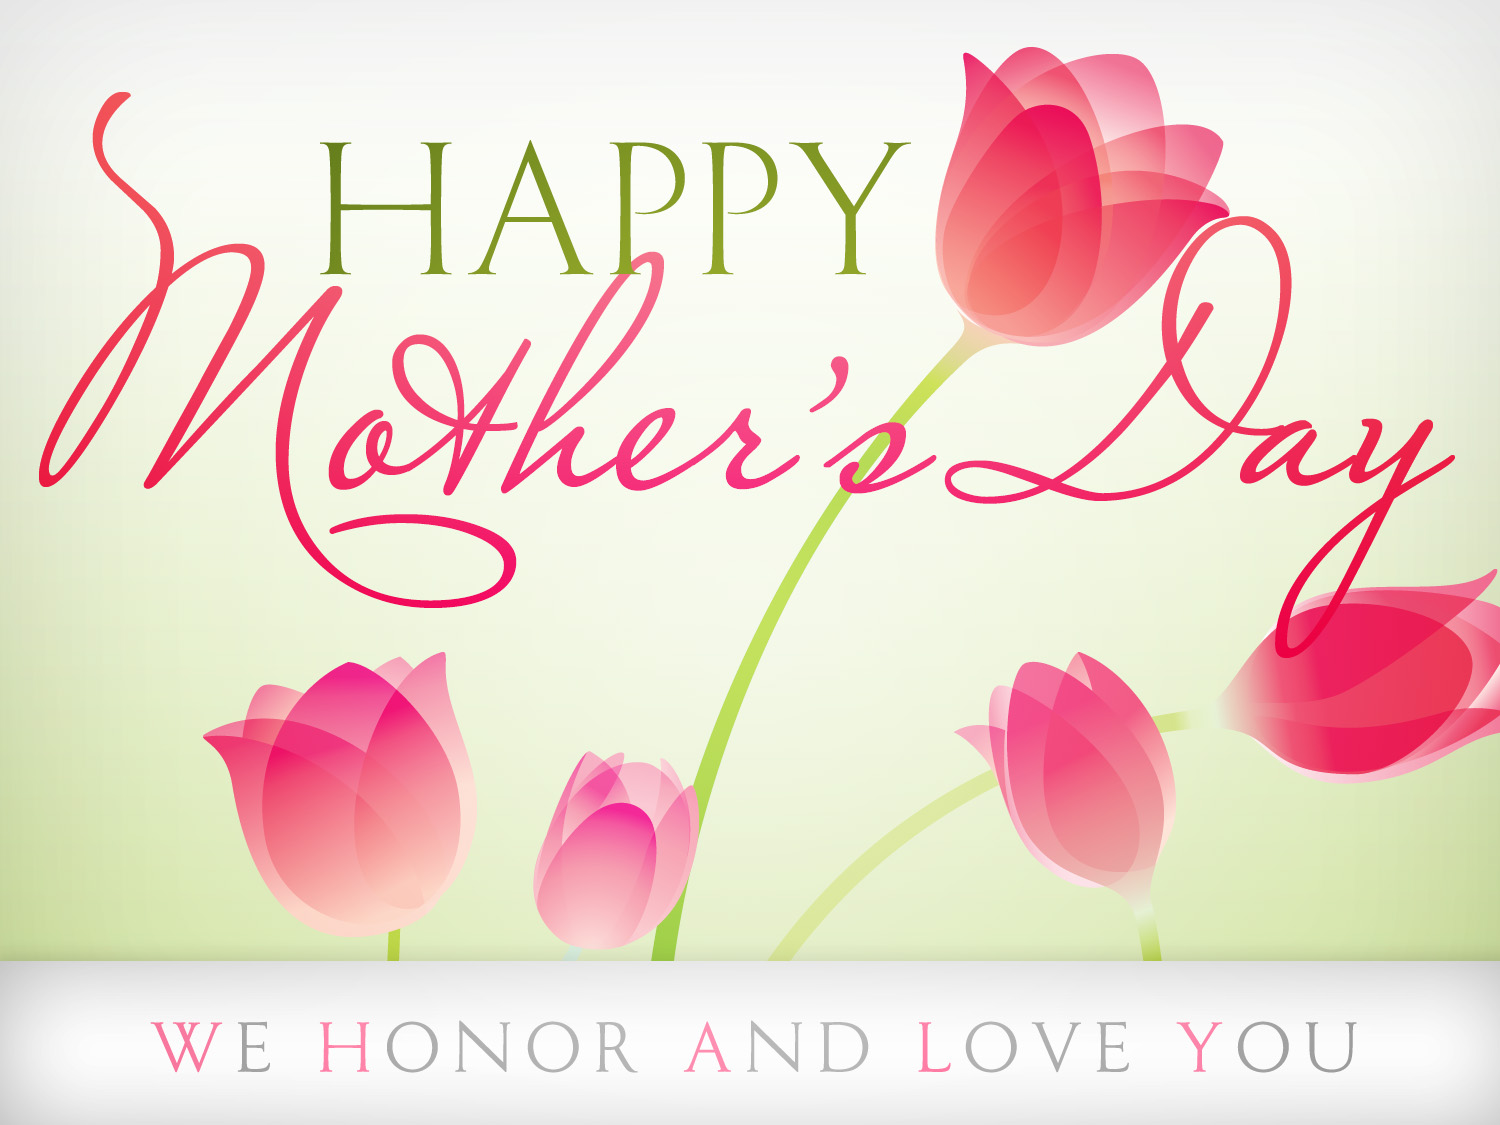 Happy Mothers Day Greeting Cards 2016 - Free Download 